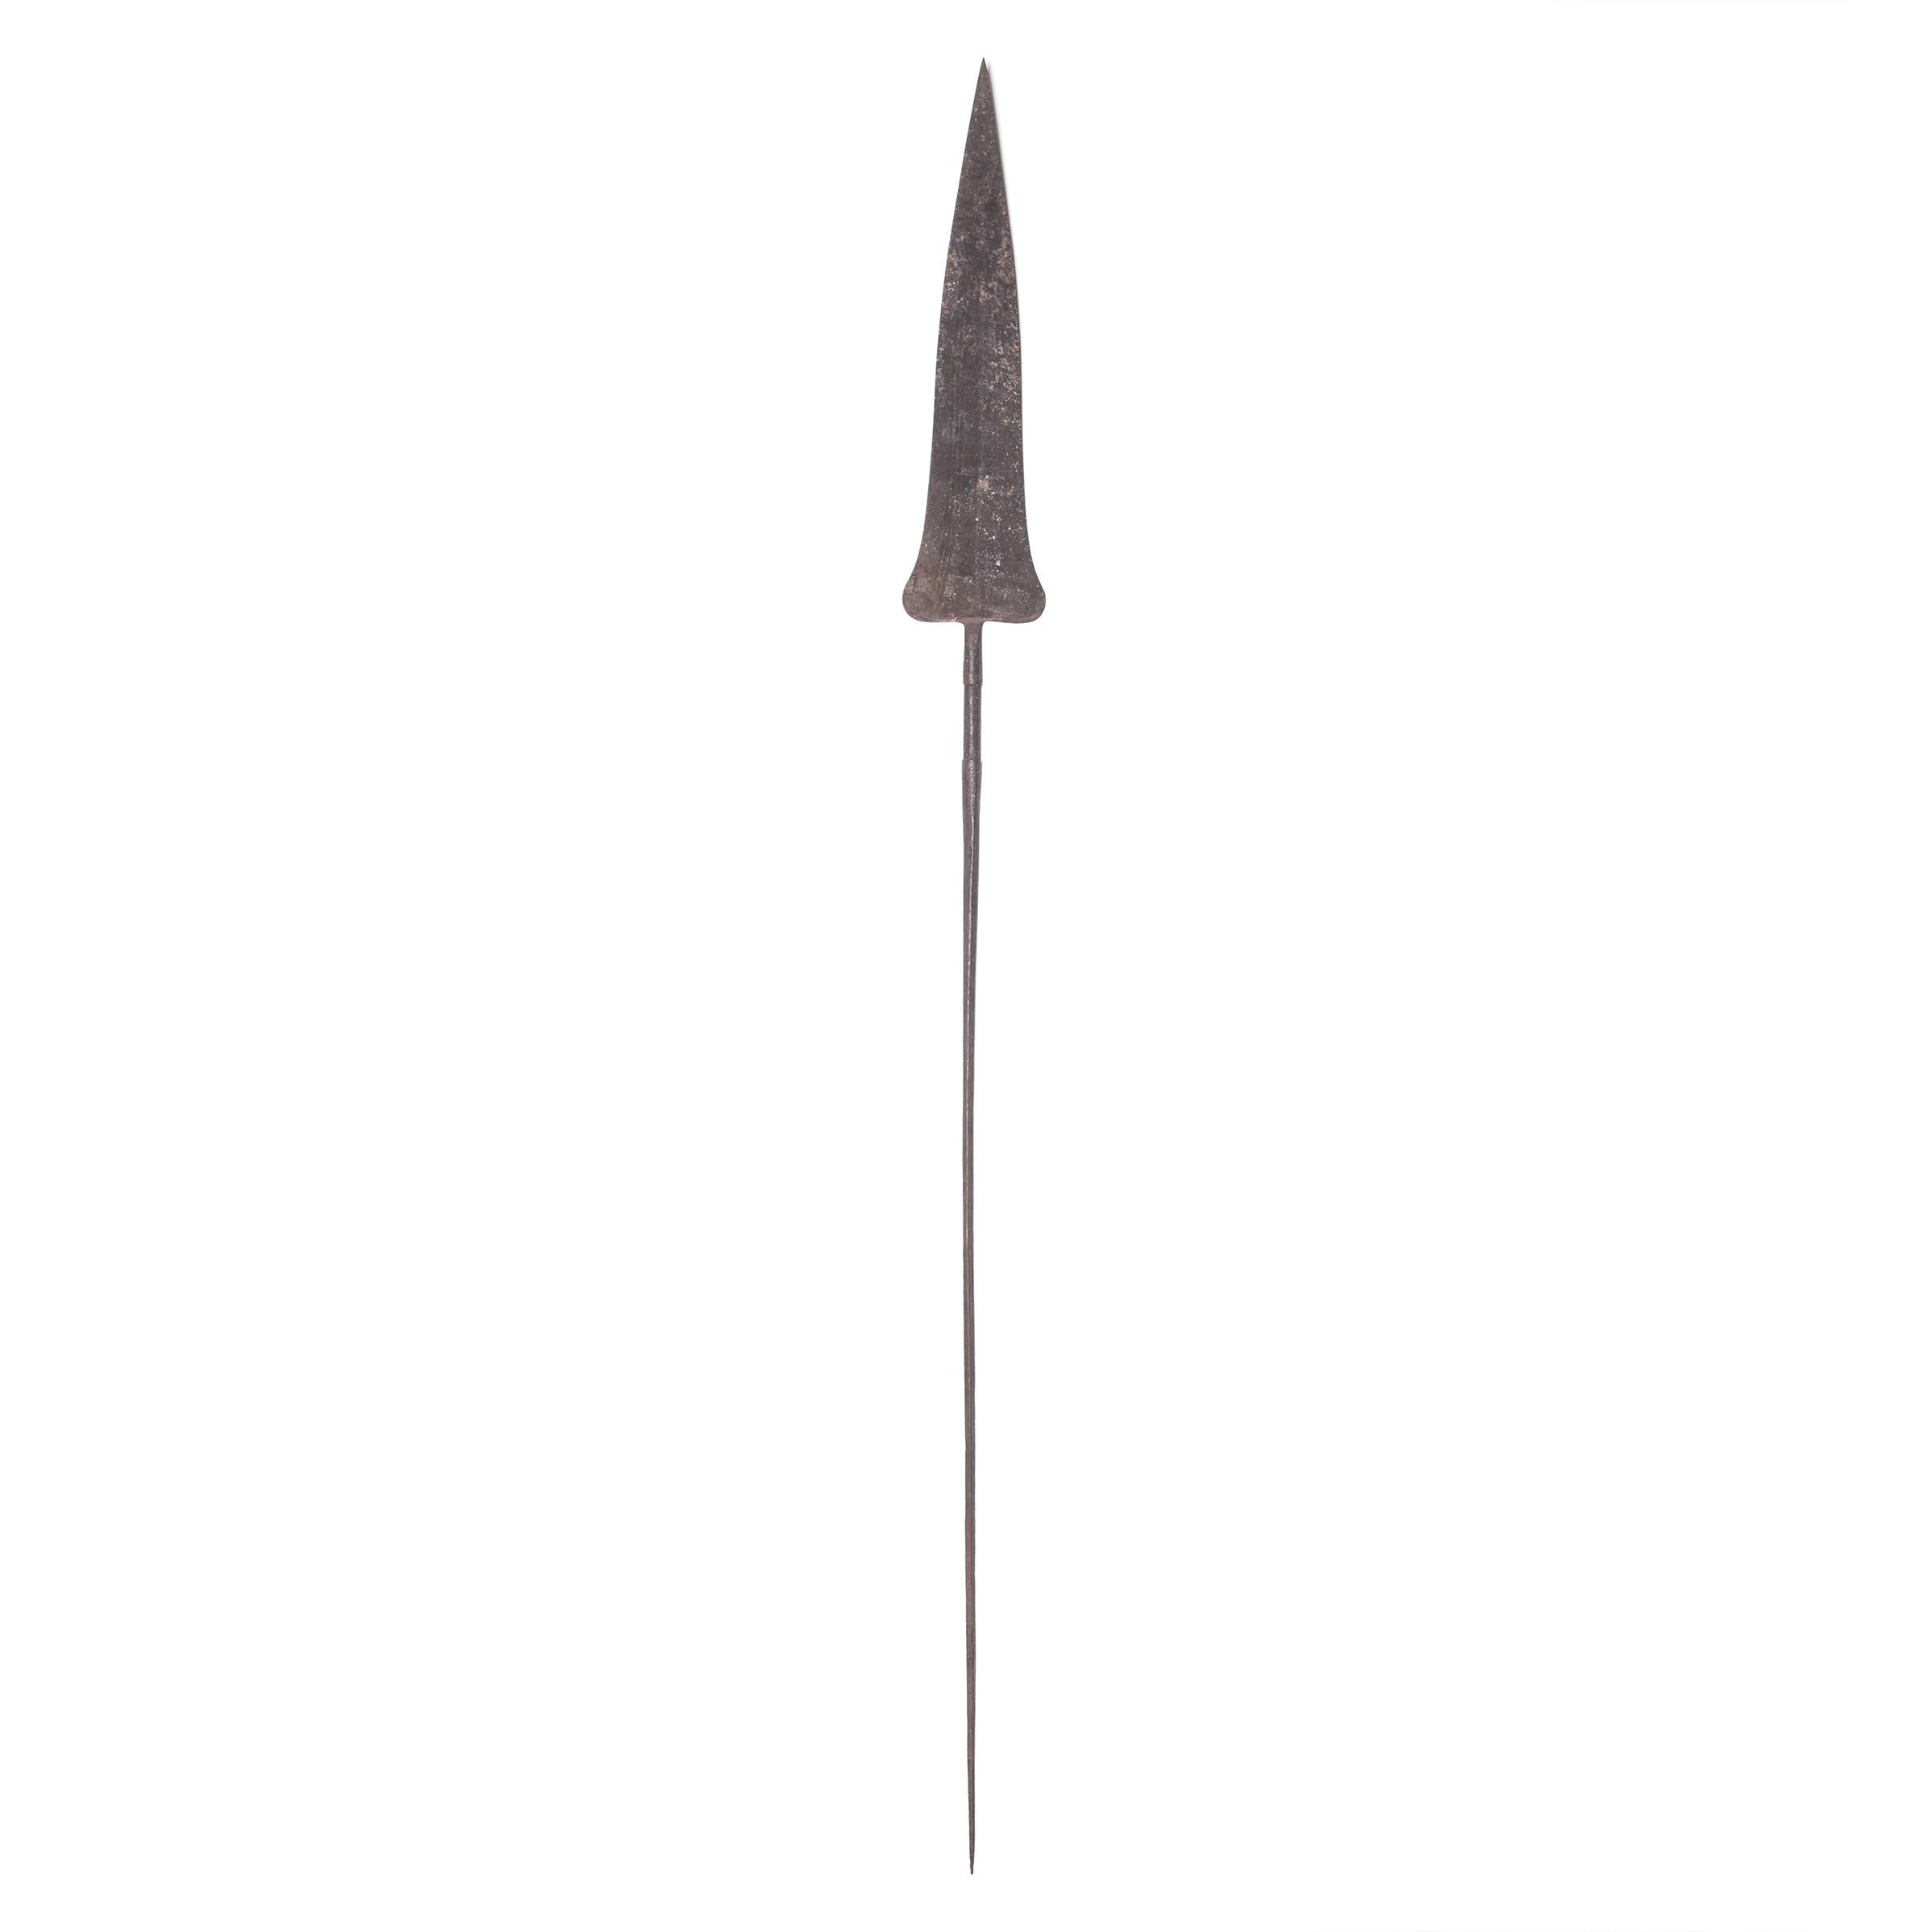 Congolese Kuba Currency Spear, circa 1900